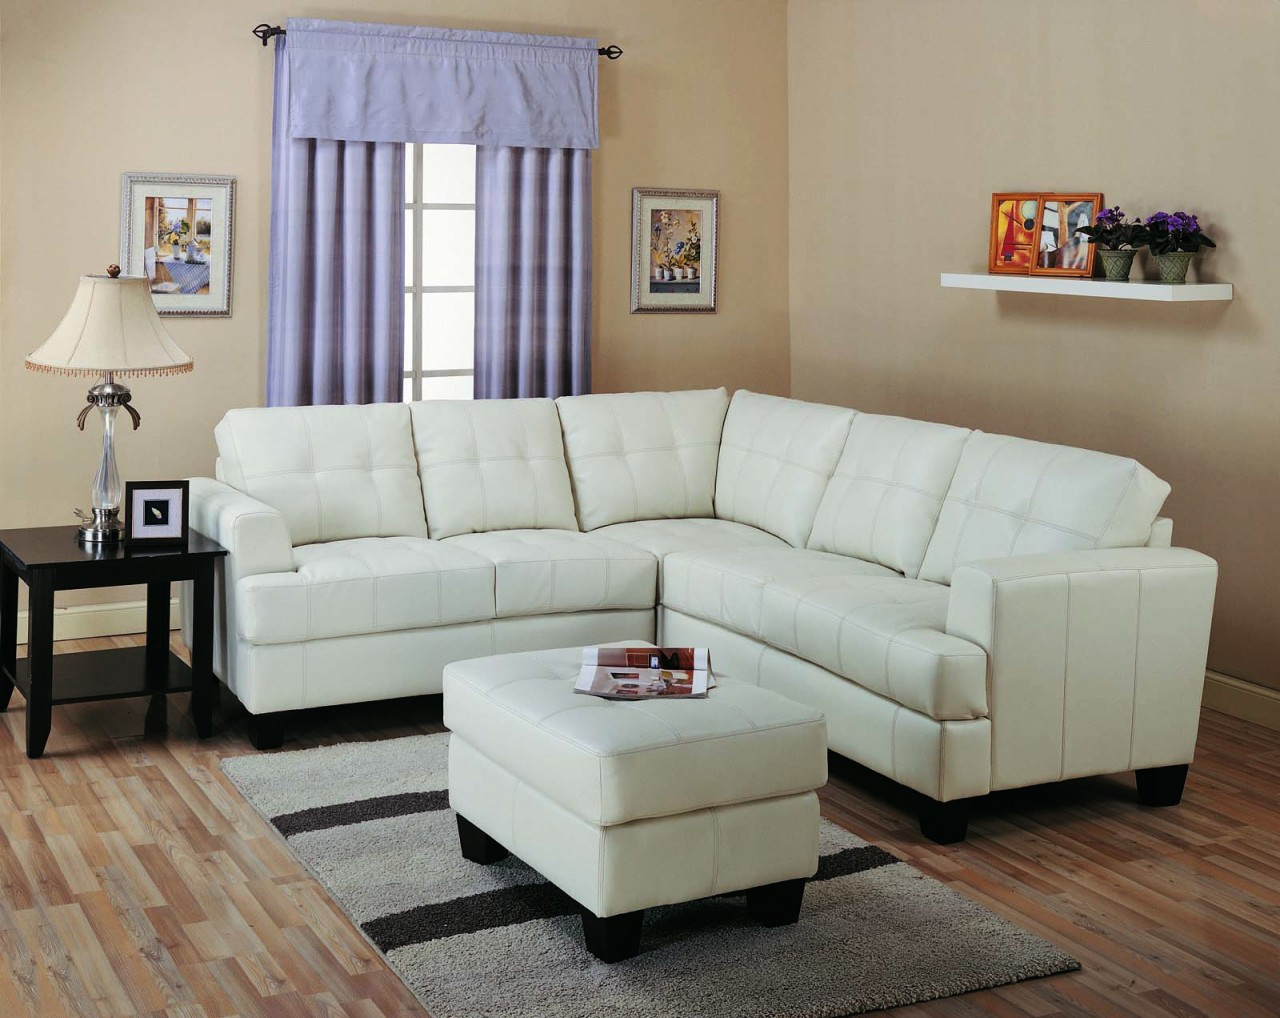 Sofas for Small Living Room Unique Types Of Best Small Sectional Couches for Small Living